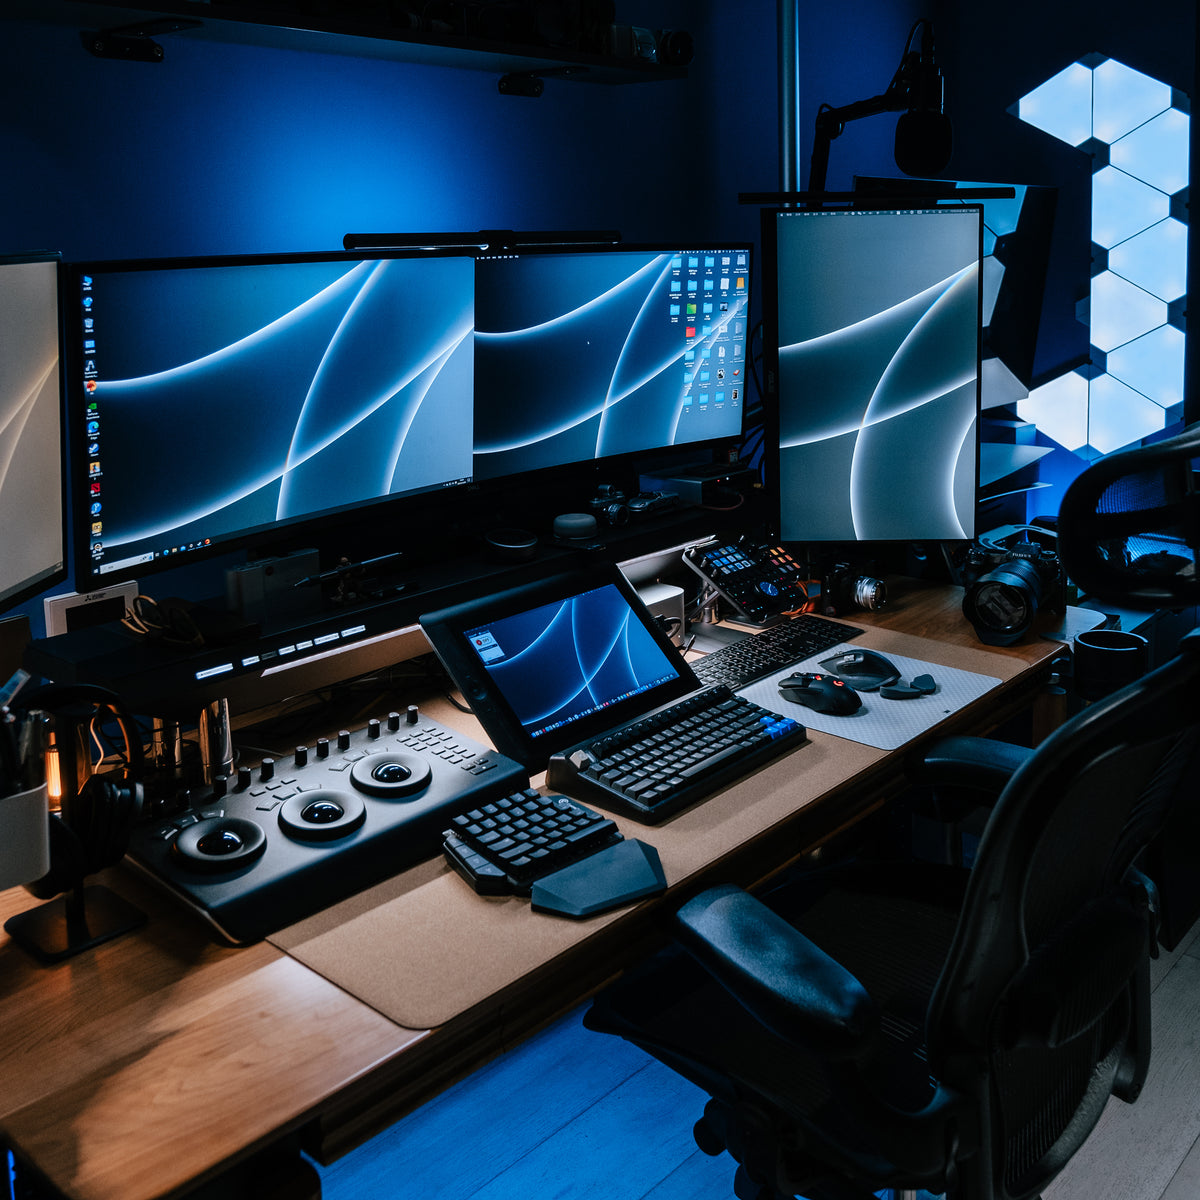 Happy Wednesday, guys! Today, we're sharing the desktop setup of our user. “Hexcal  Studio is like a working universe, with its…